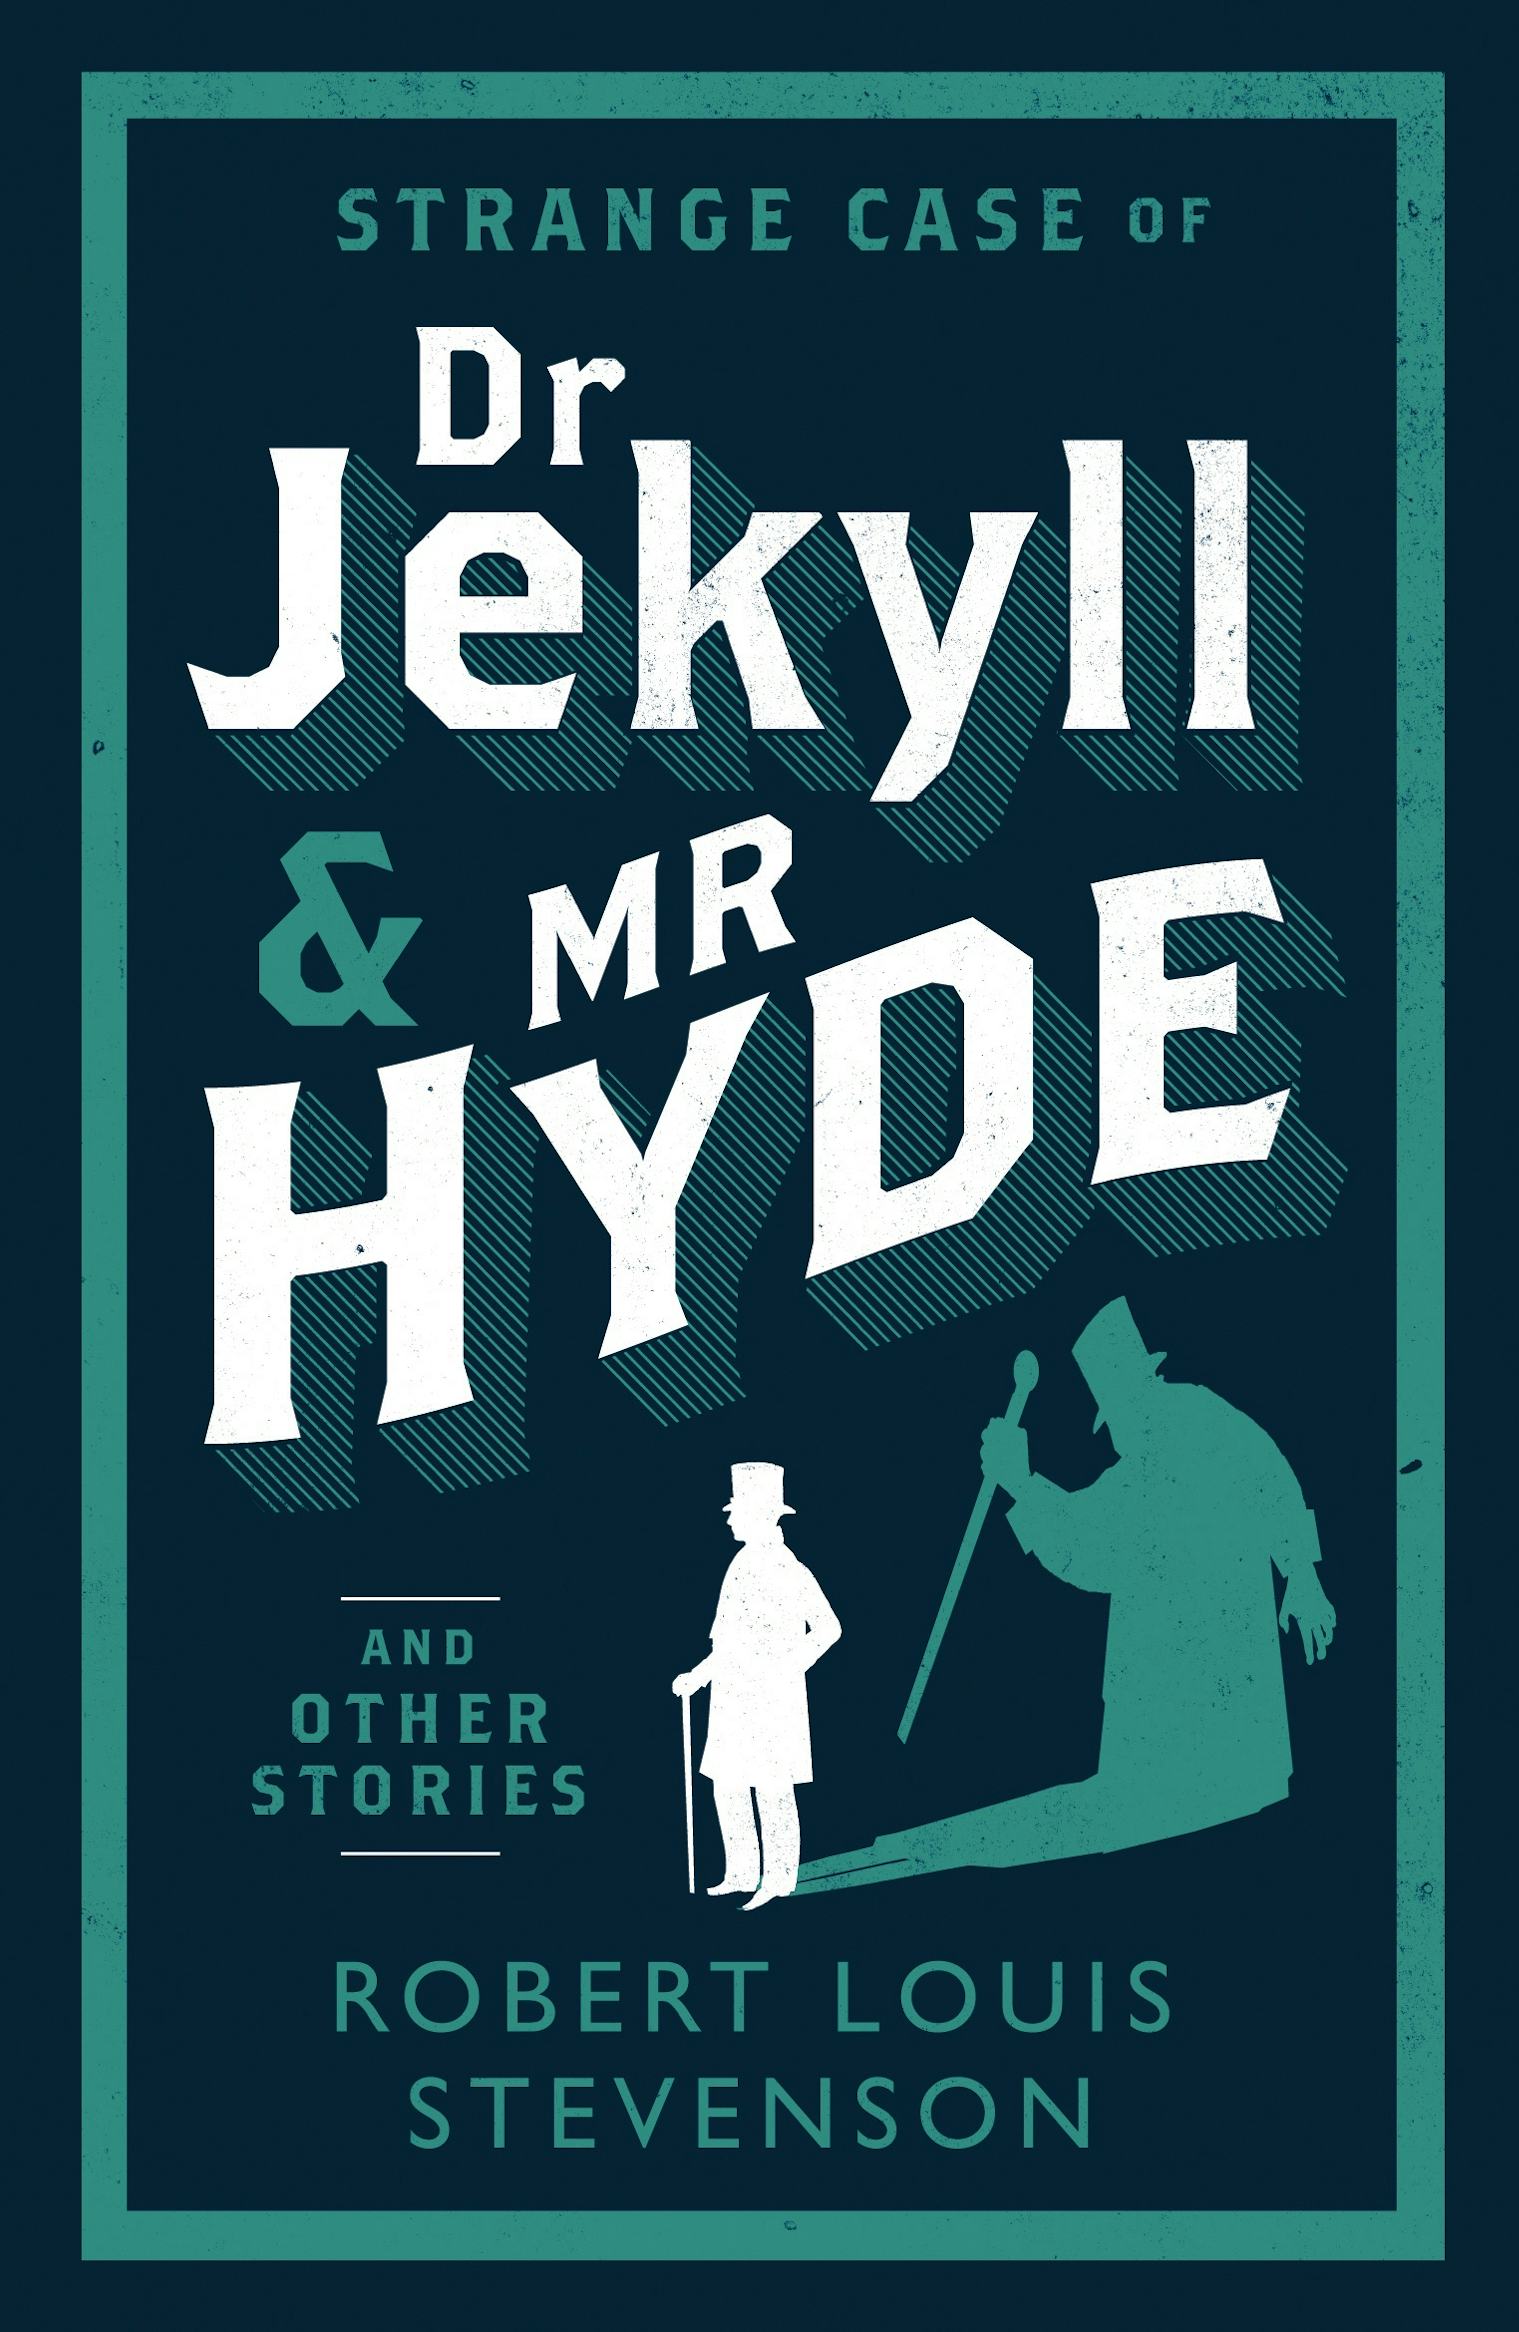 is-dr-jekyll-and-mr-hyde-based-on-a-true-story-there-s-a-complicated-and-terrifying-answer